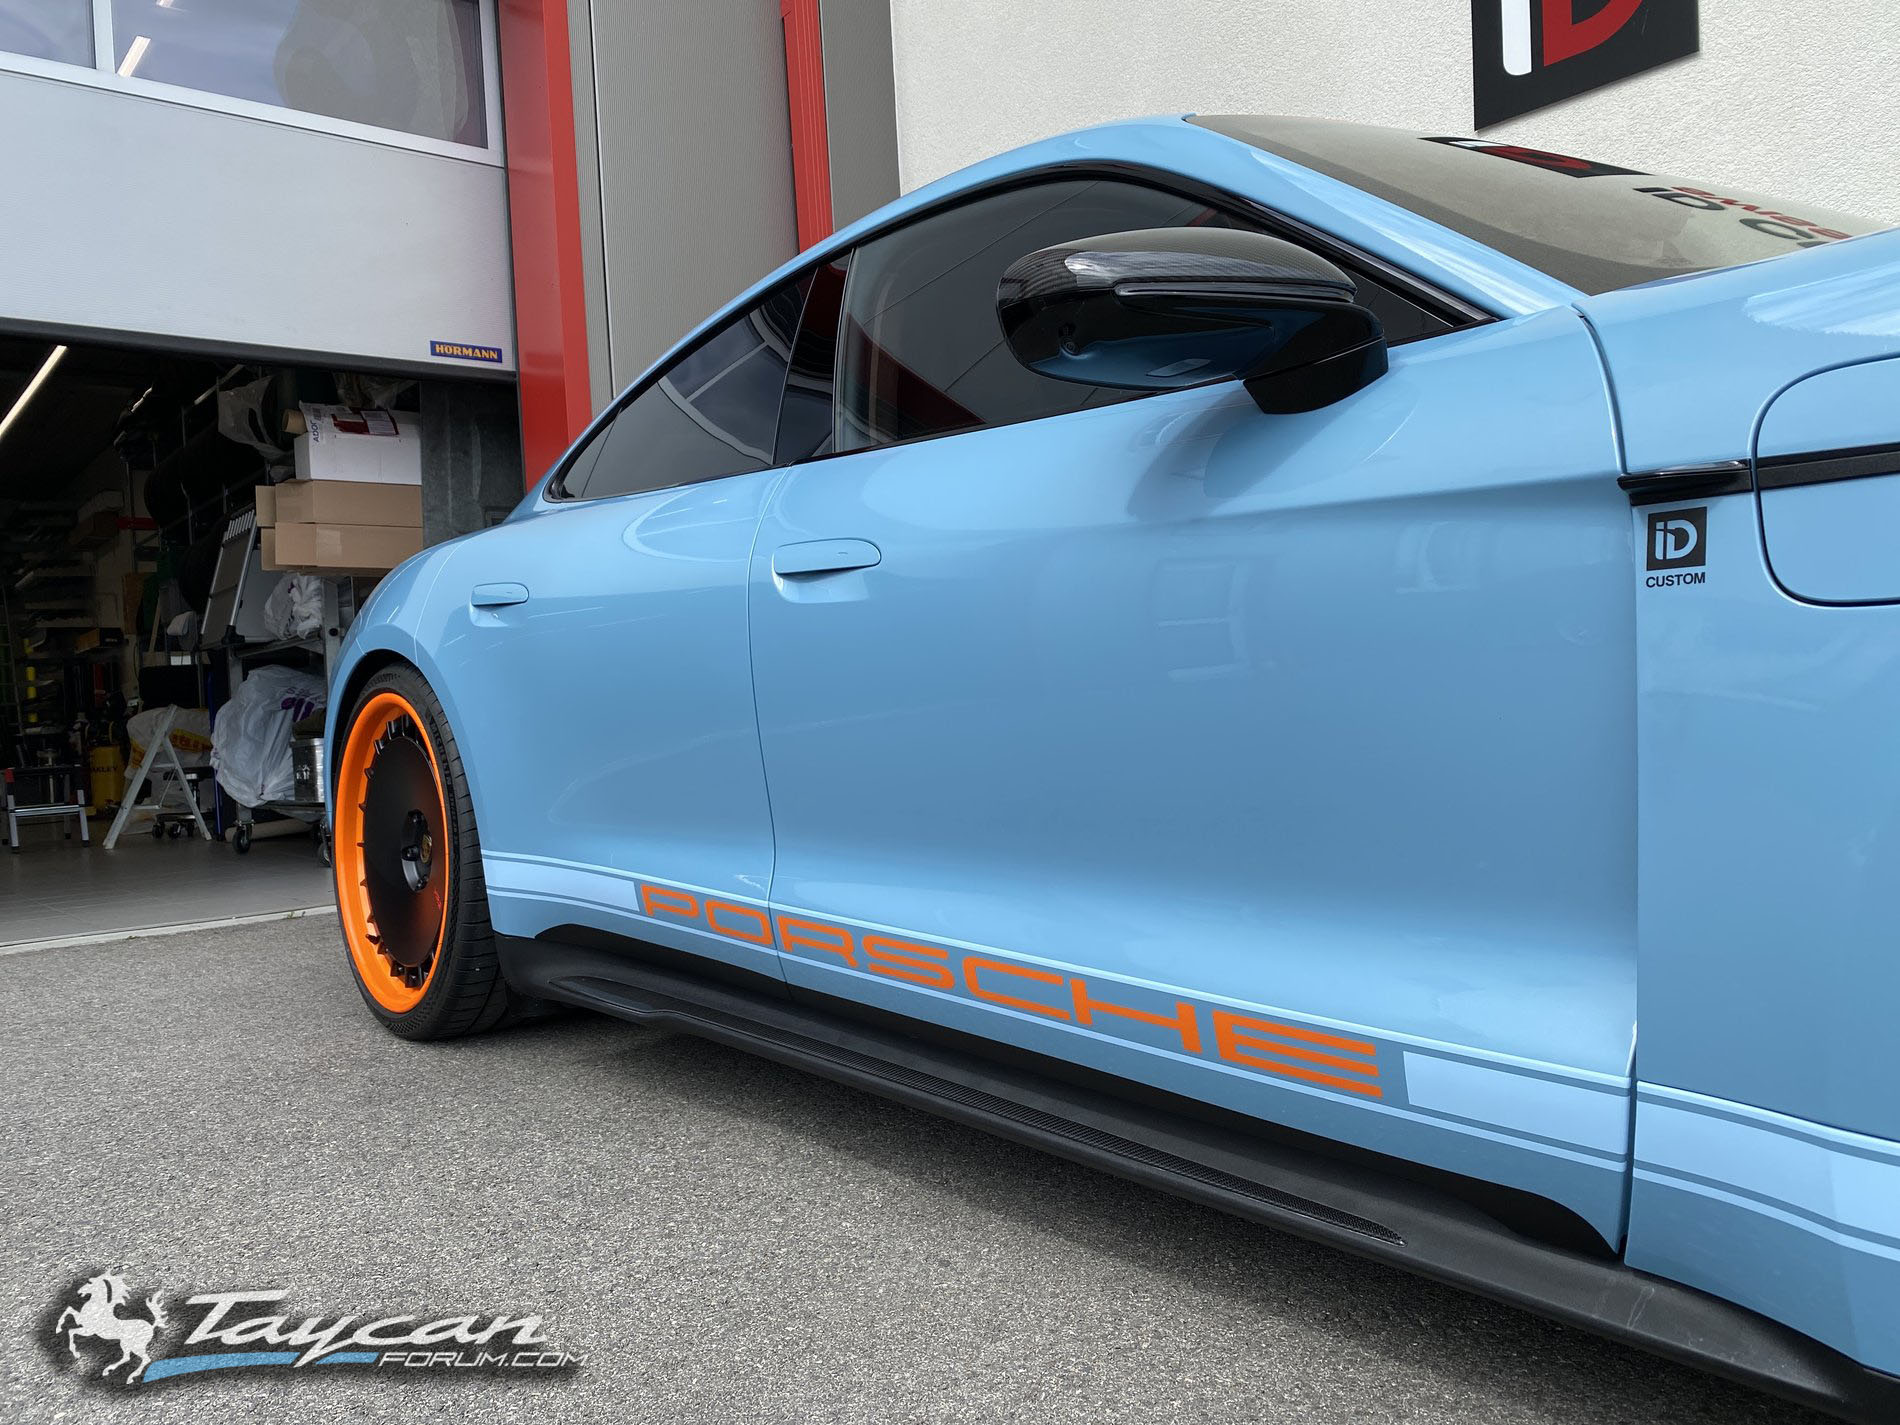 Porsche Taycan Aftermarket wheels for Taycan wrapped-taycan-r-gulf-livery-hre-wheels-2-